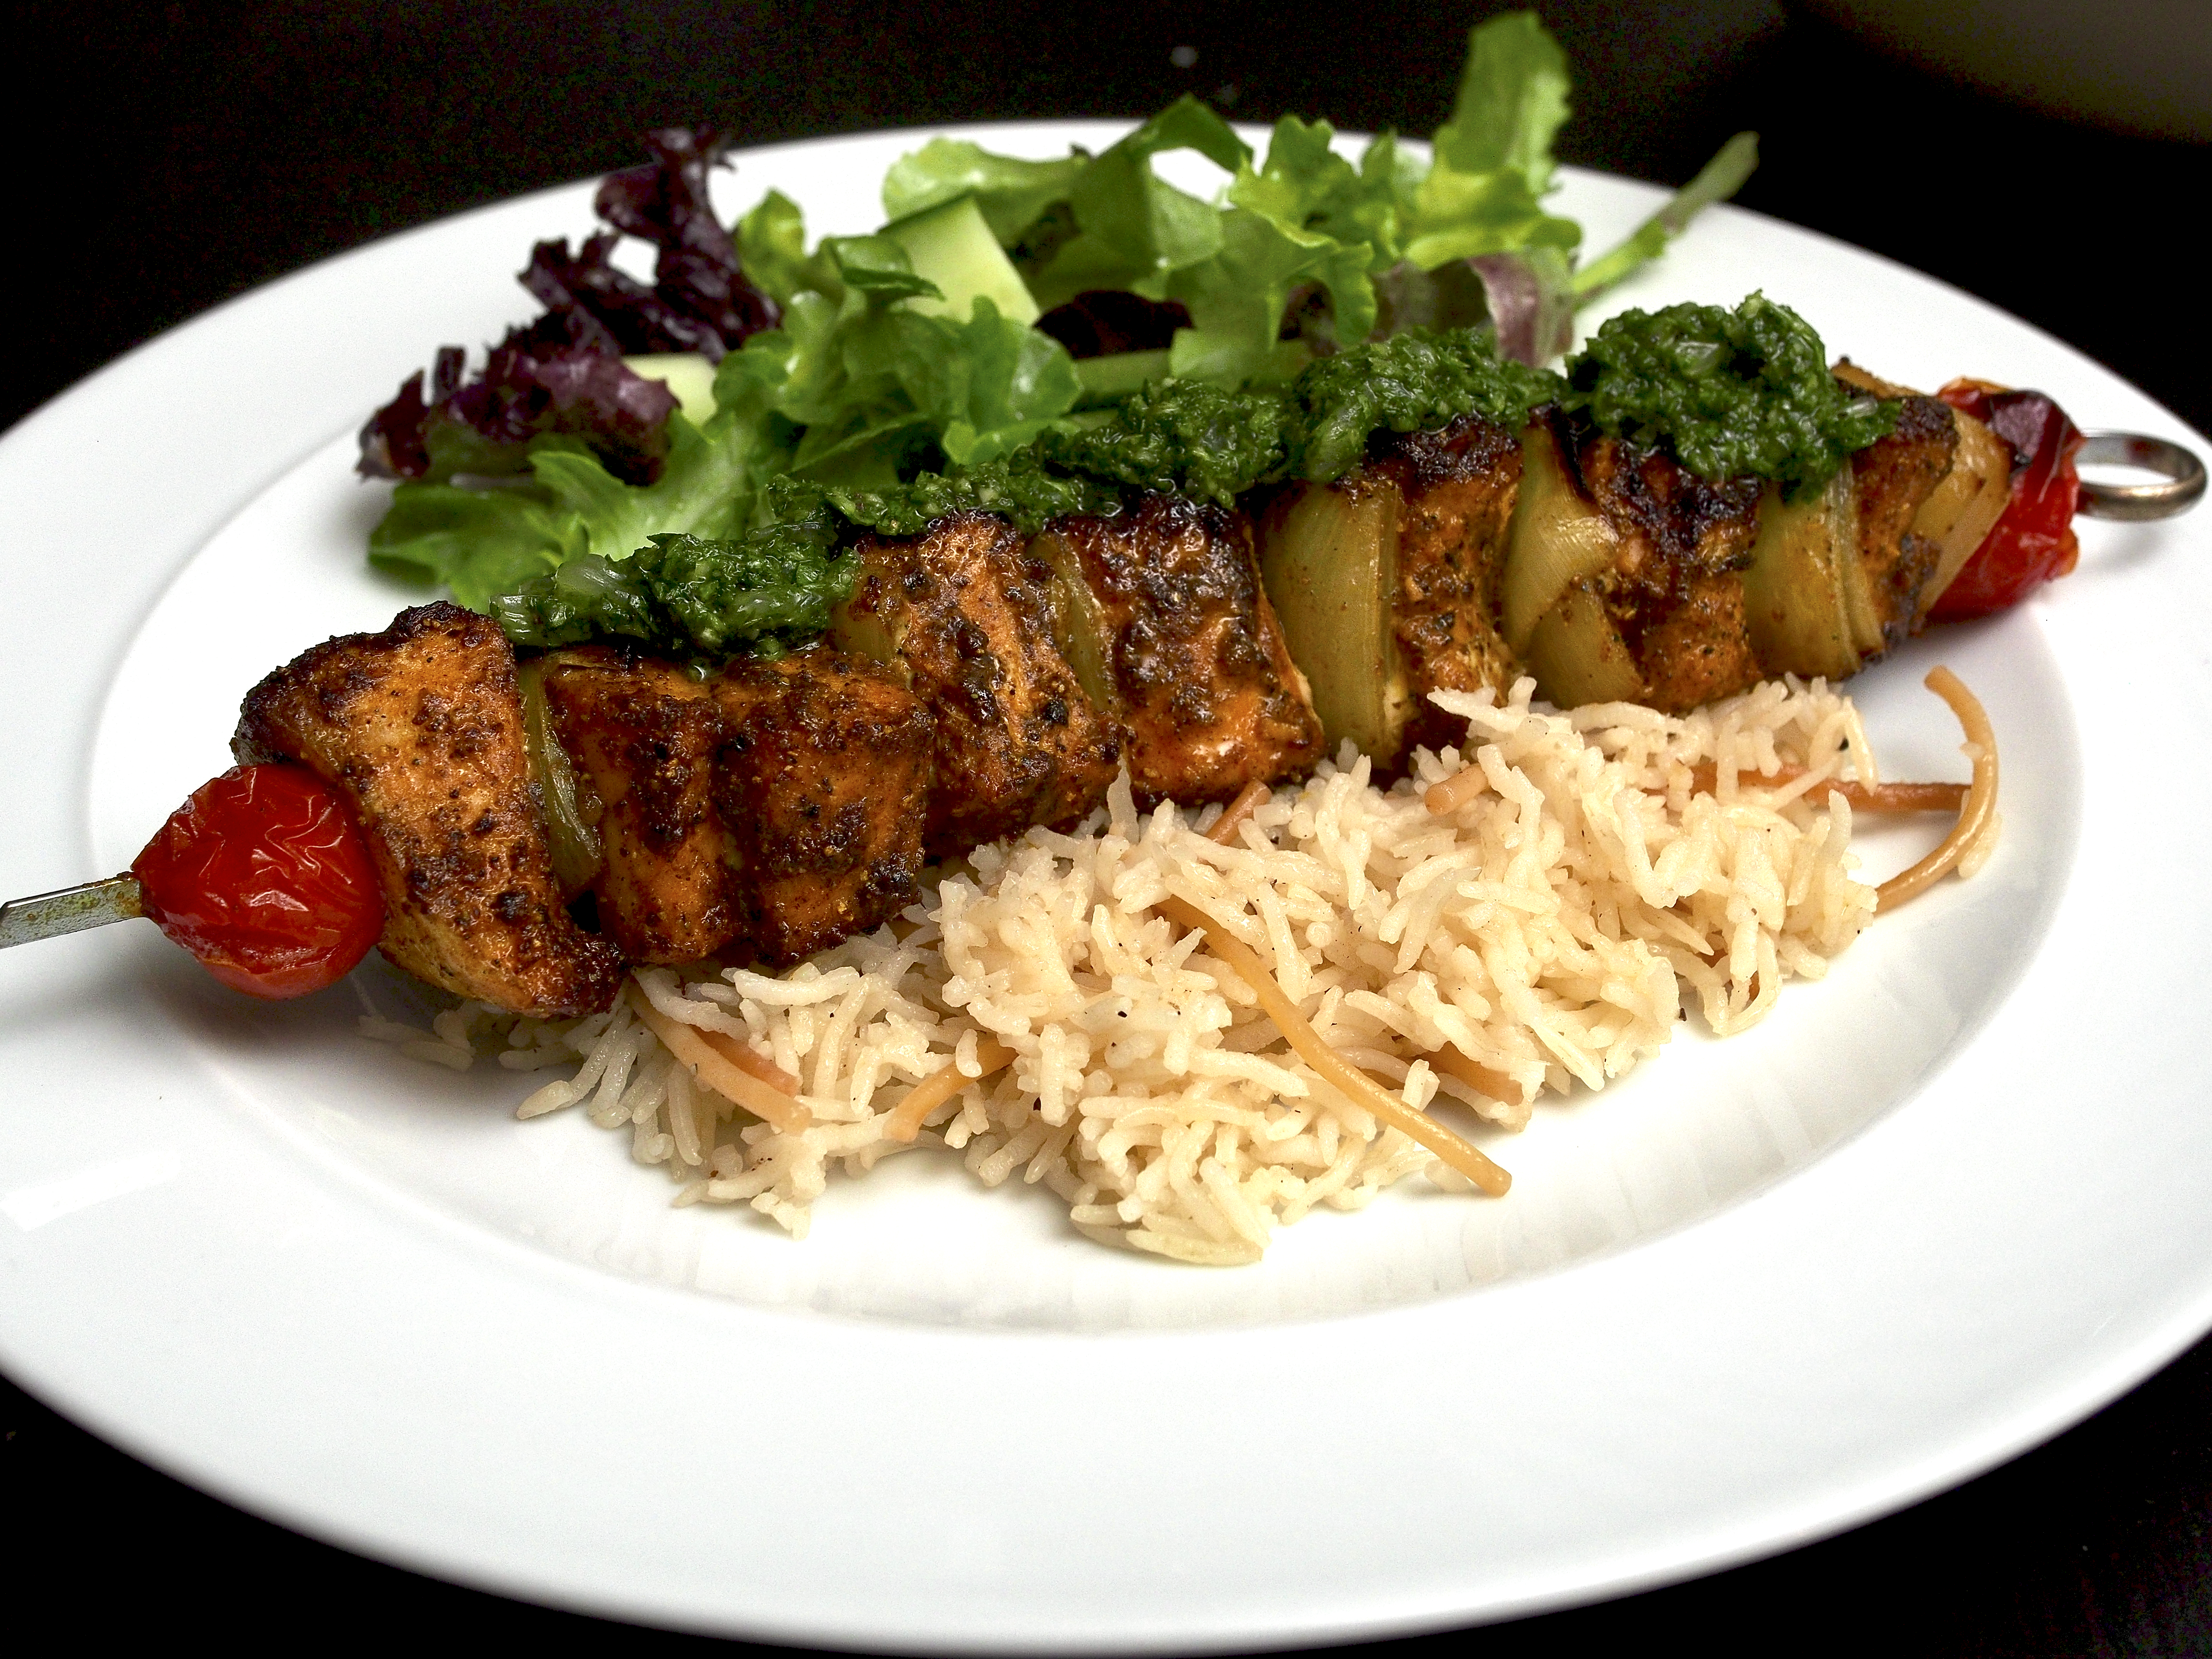 Spiced Salmon Skewers with Parsley Oil